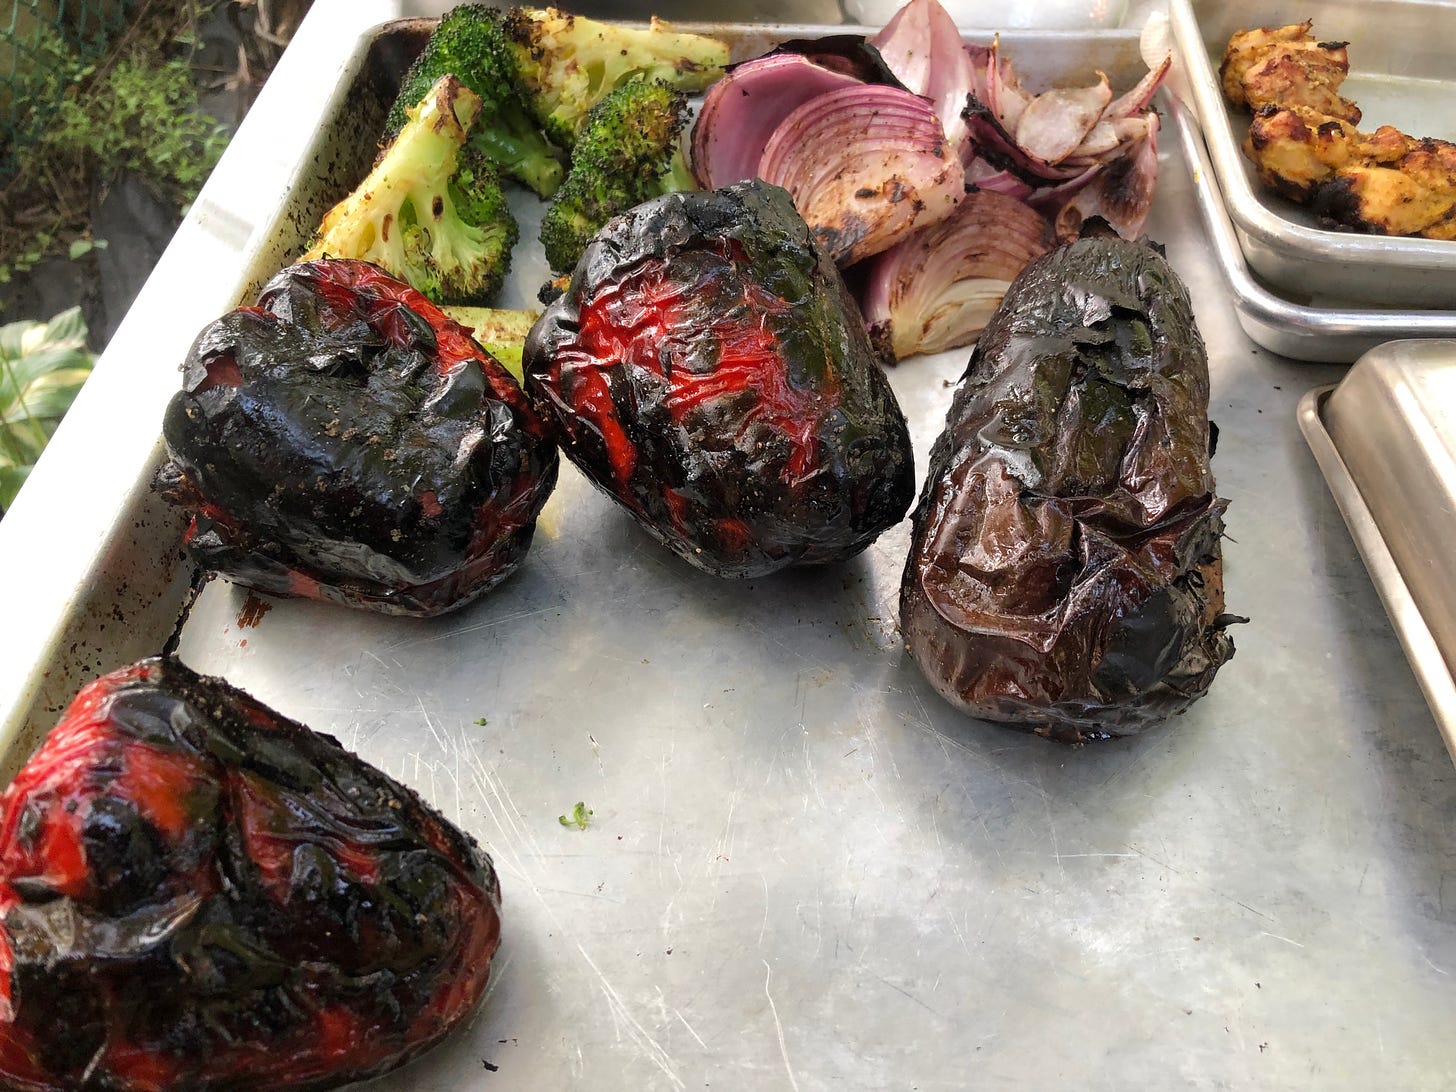 A tray holding grilled broccoli chunks and grilled red onion in the background. In the foreground, there are three whole grilled red peppers and a whole grilled eggplant, all with their skin very charred. 